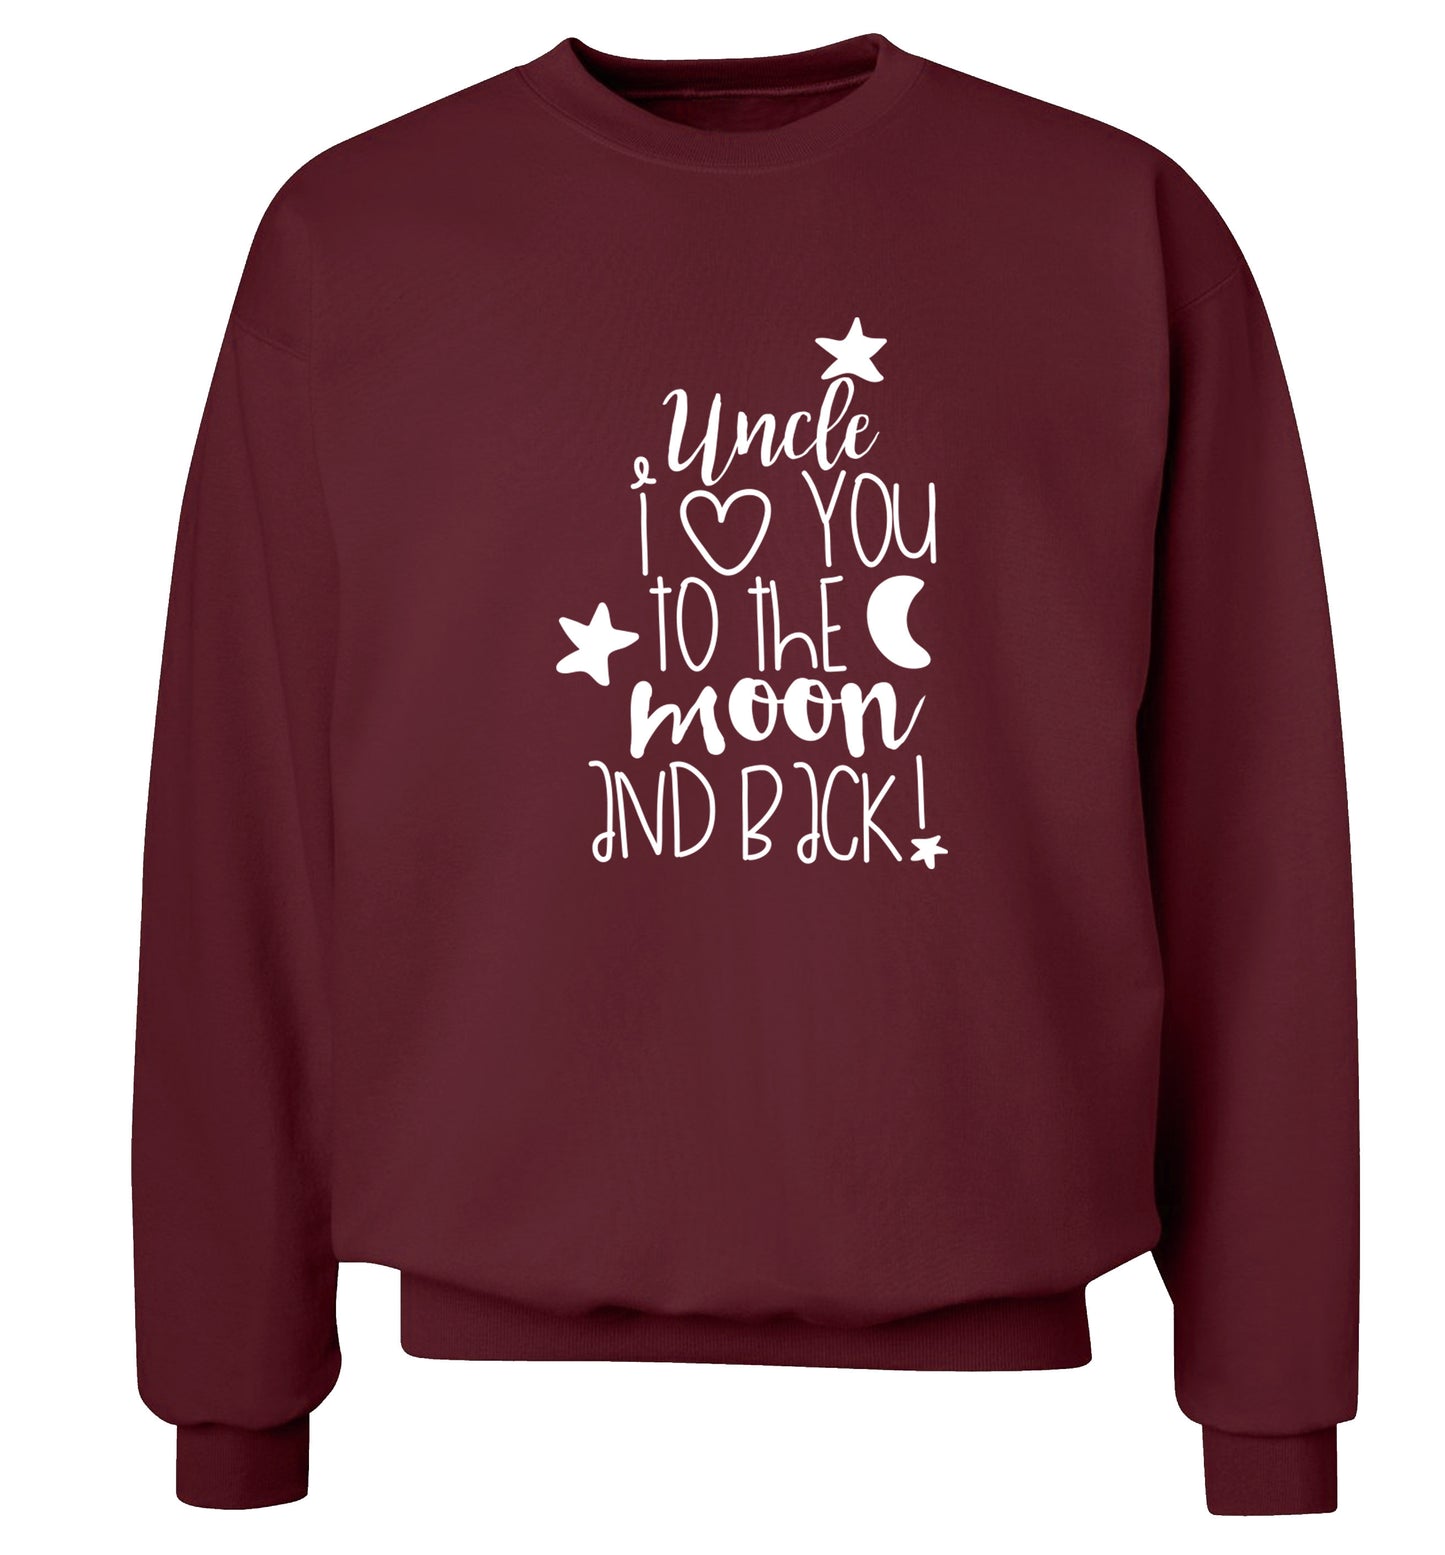 Uncle I love you to the moon and back Adult's unisex maroon  sweater 2XL